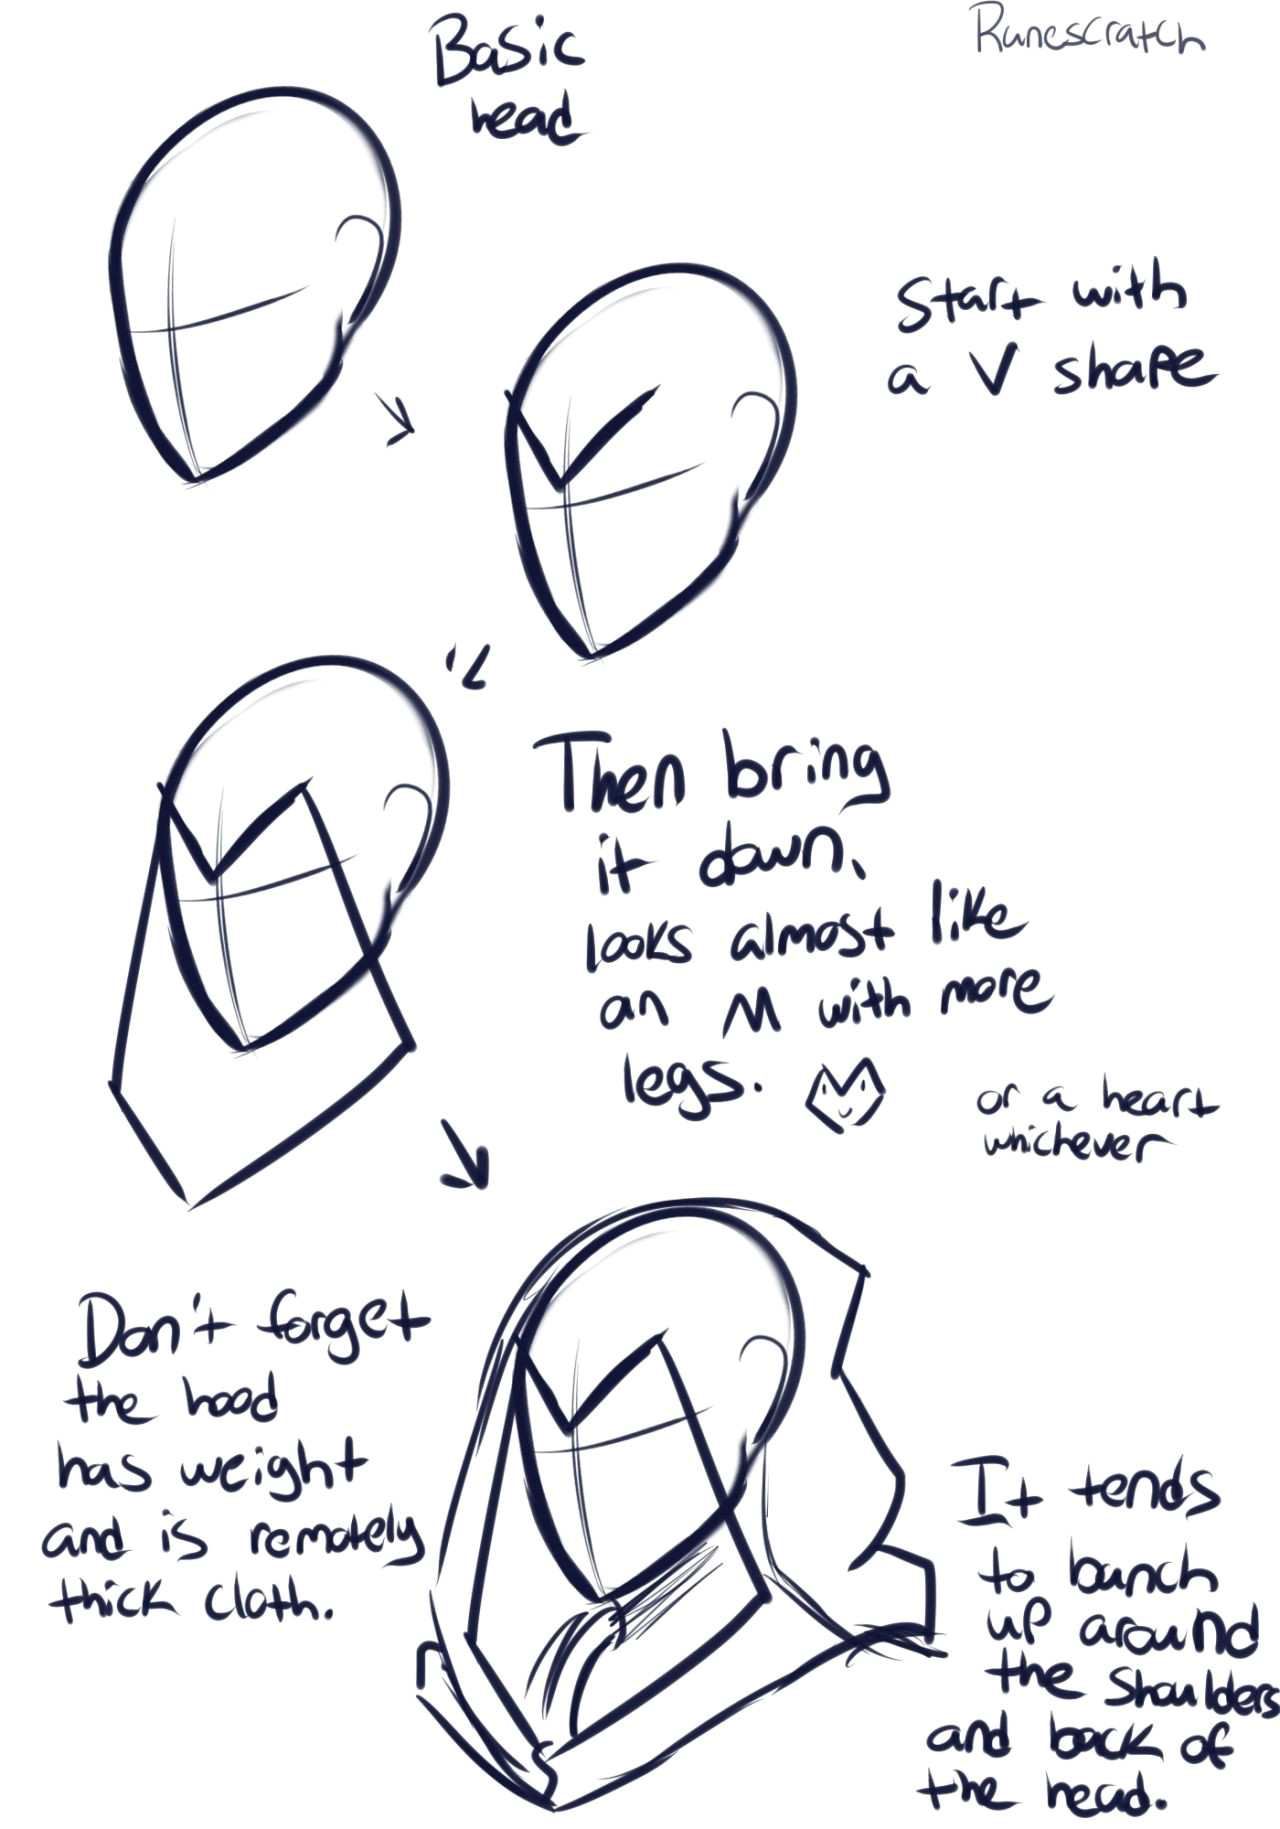 hoods art reference by talon rune from silly chicken scratch on tumblr